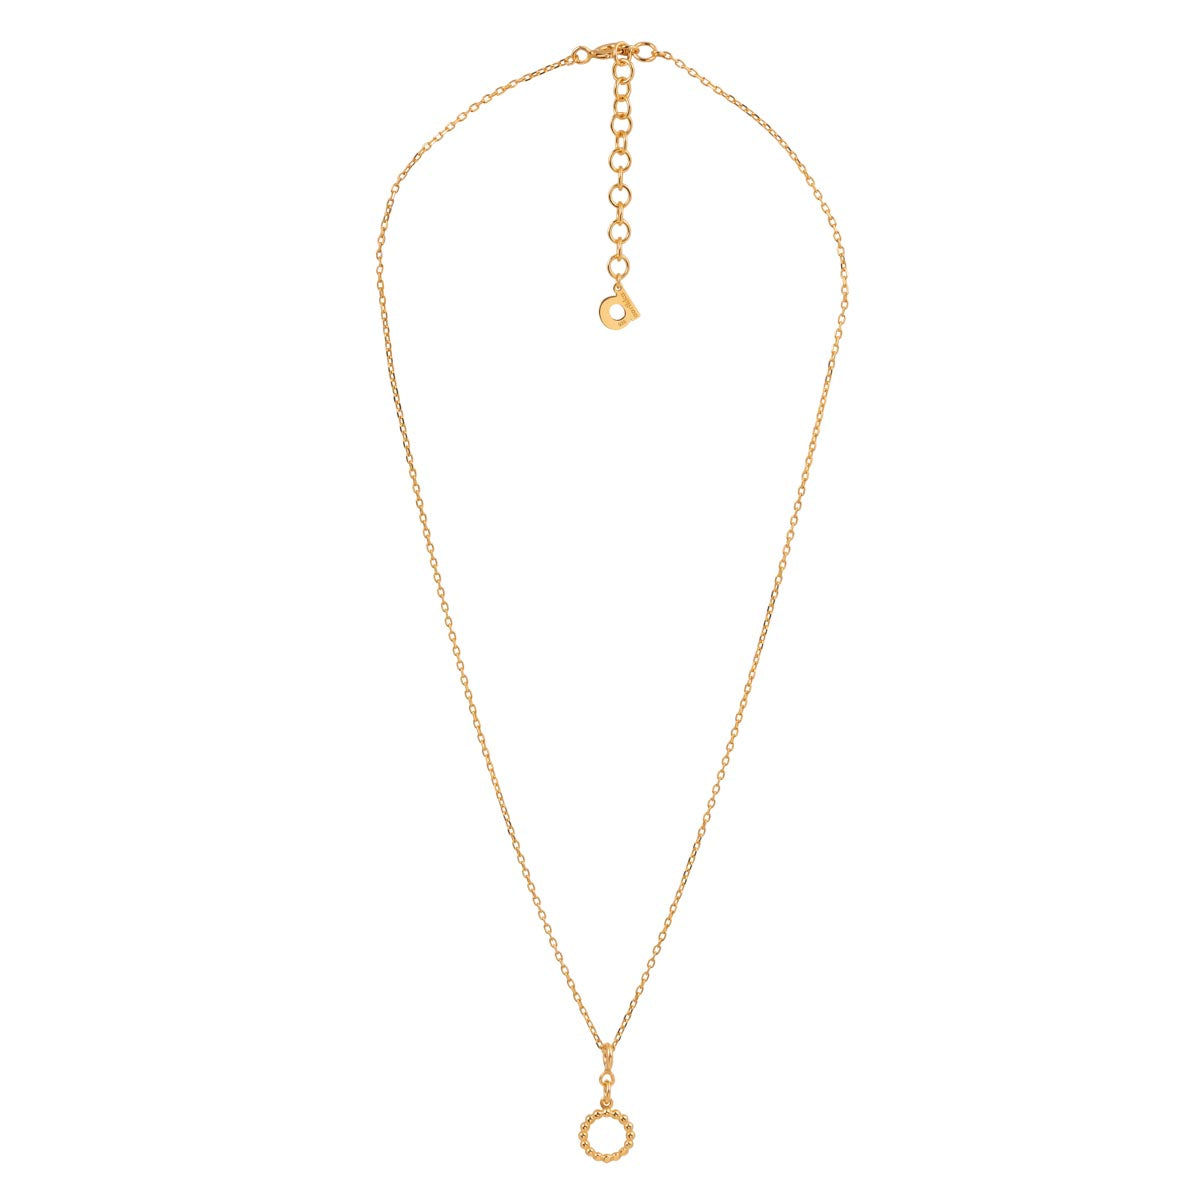 Yllätys Monogram Necklace O, gold-plated silver